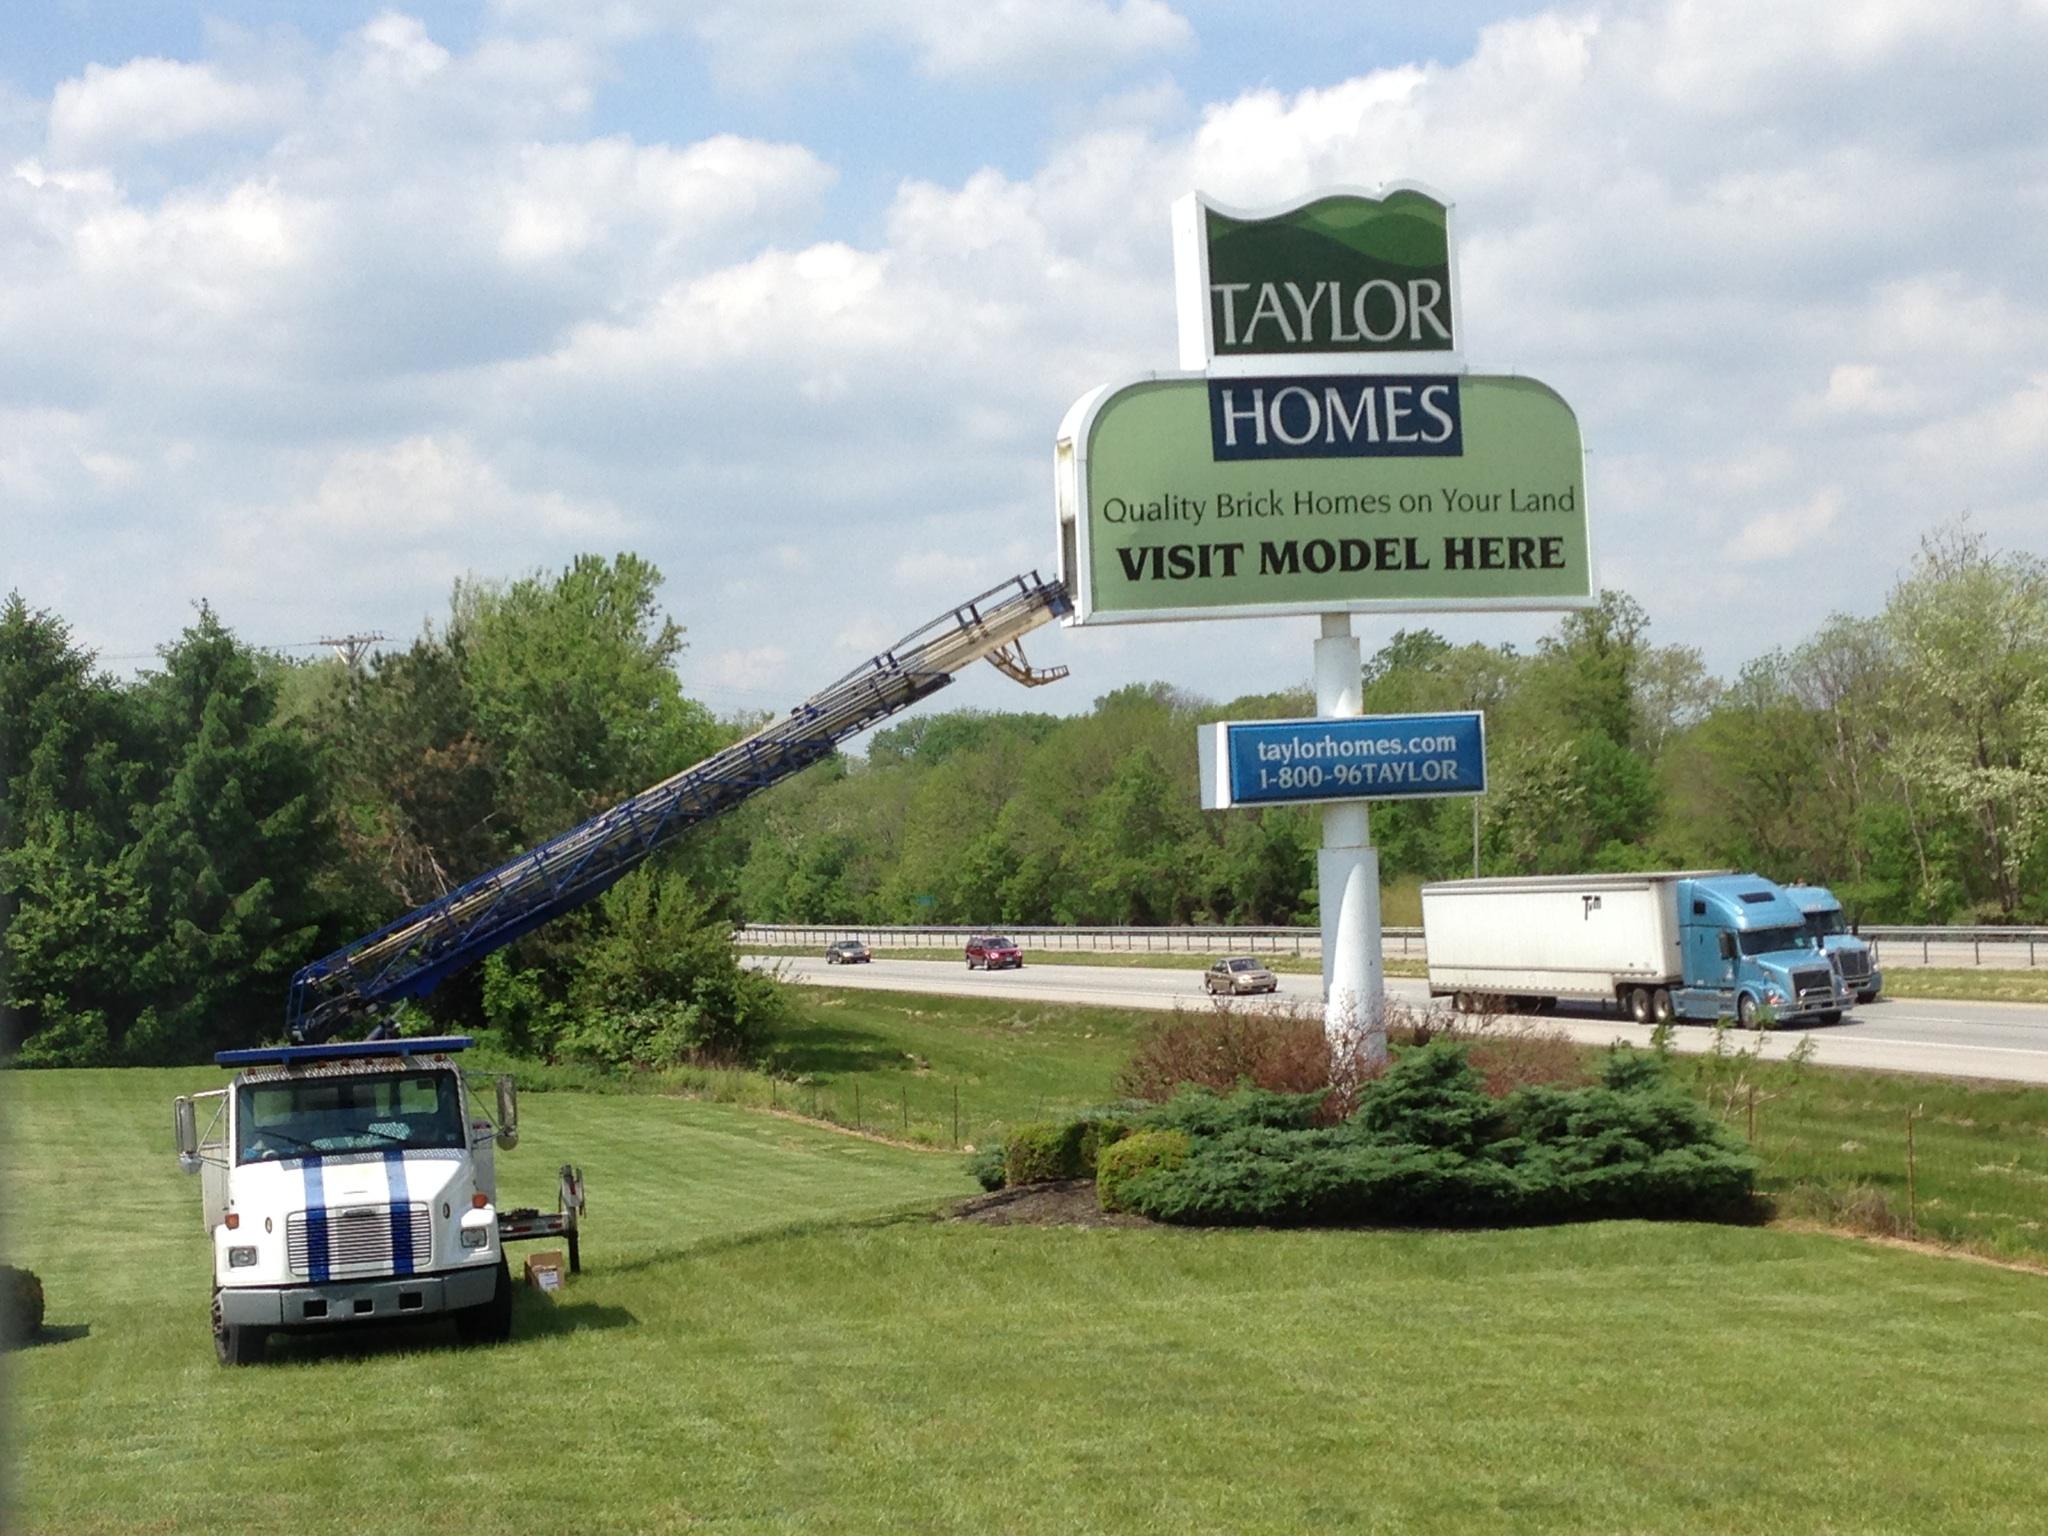 FASTSIGNS® Custom Sign Shop of Louisville, KY